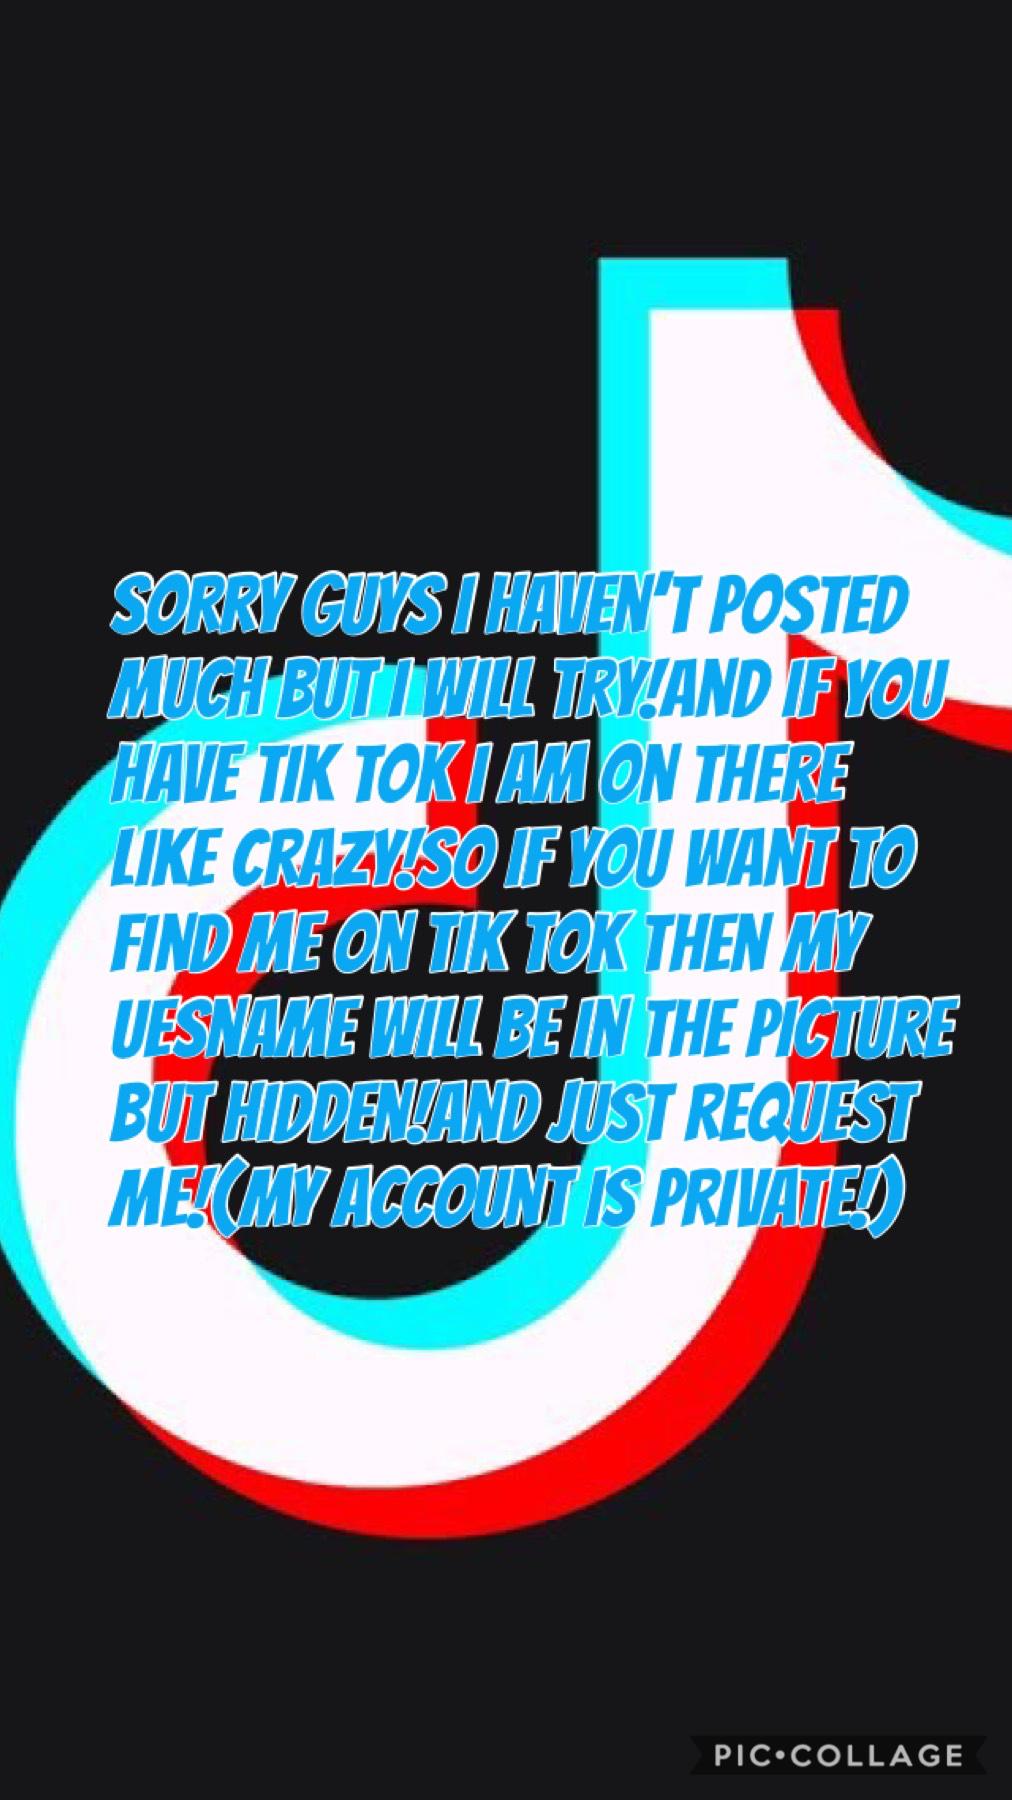 Pls do I need more followers and pls say I am from PicCollage because then I will let you in my account!!!